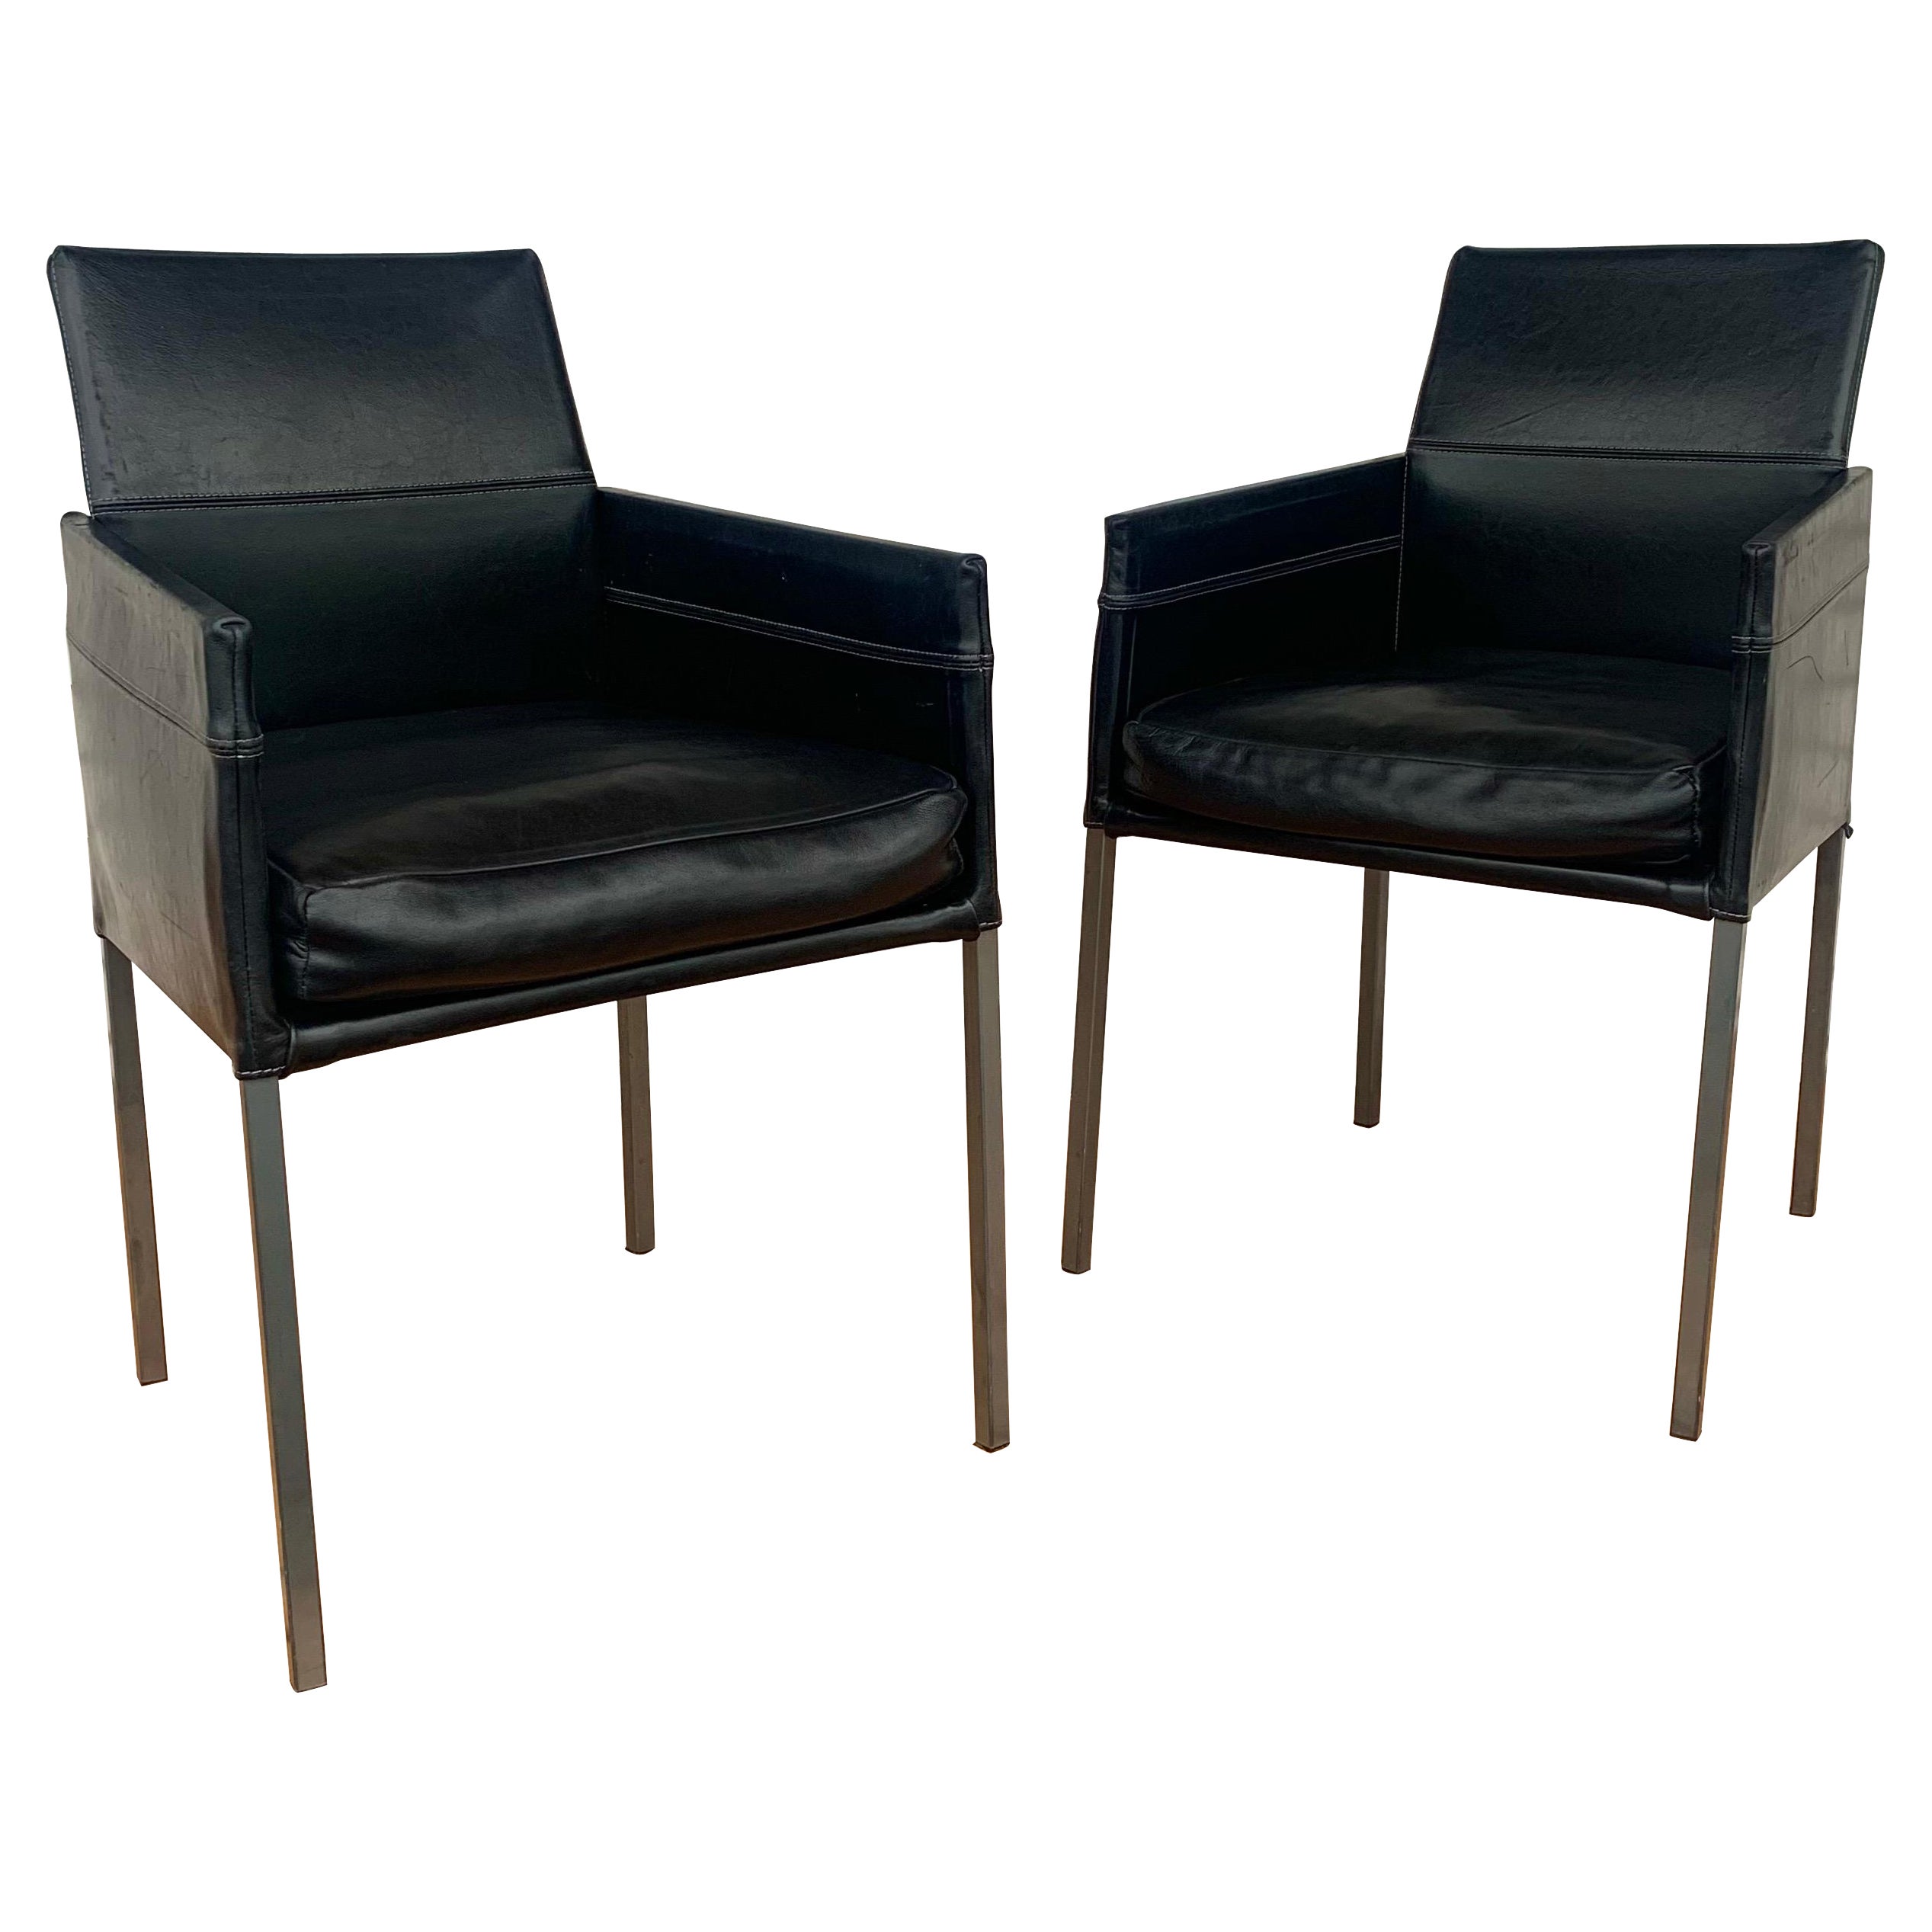 Karl Friedrich Forster Black Leather Arm Chairs, a Pair For Sale